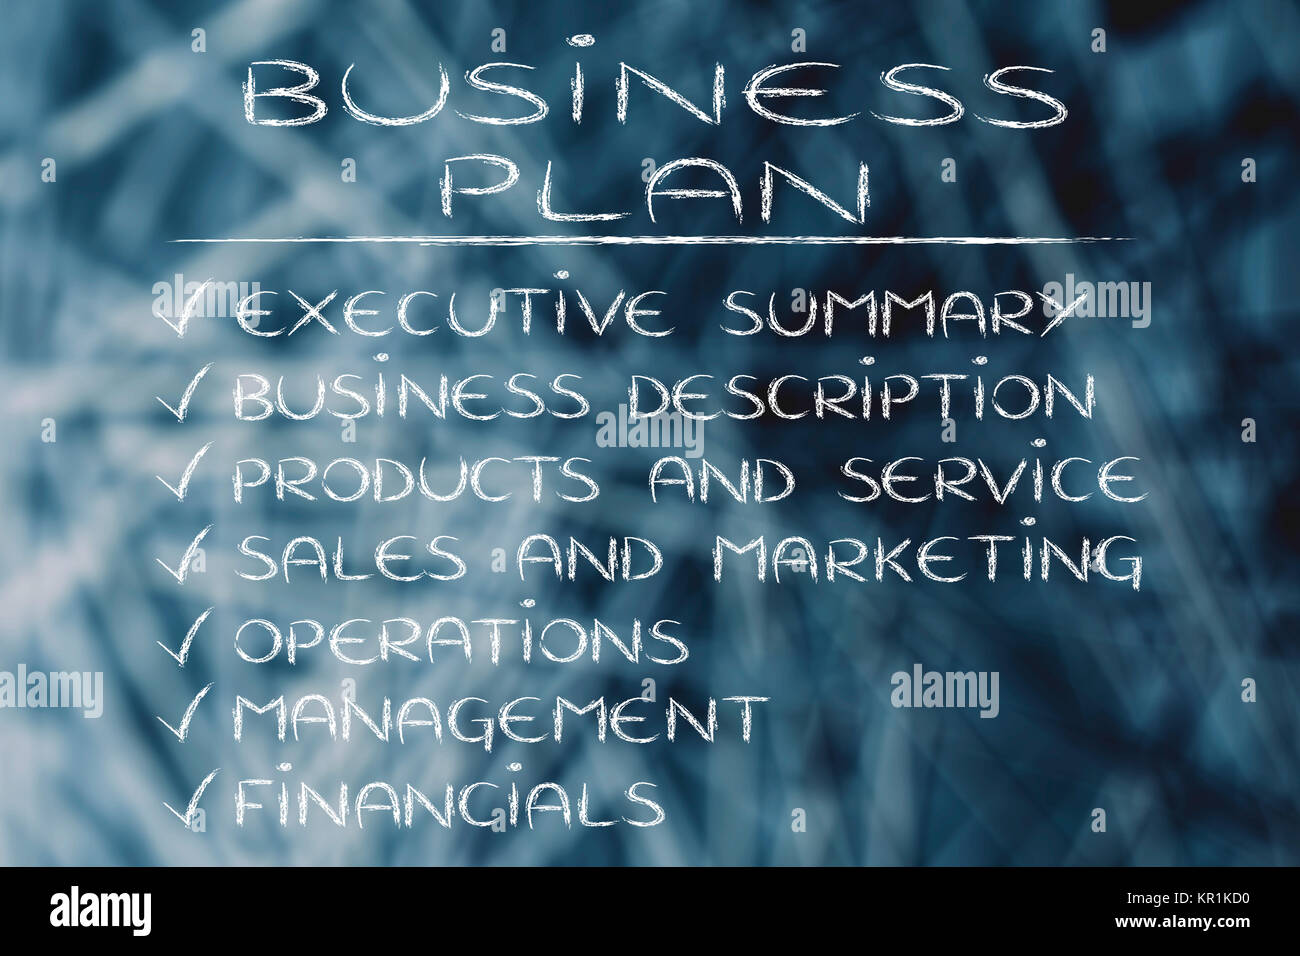 the key sections of a business plan